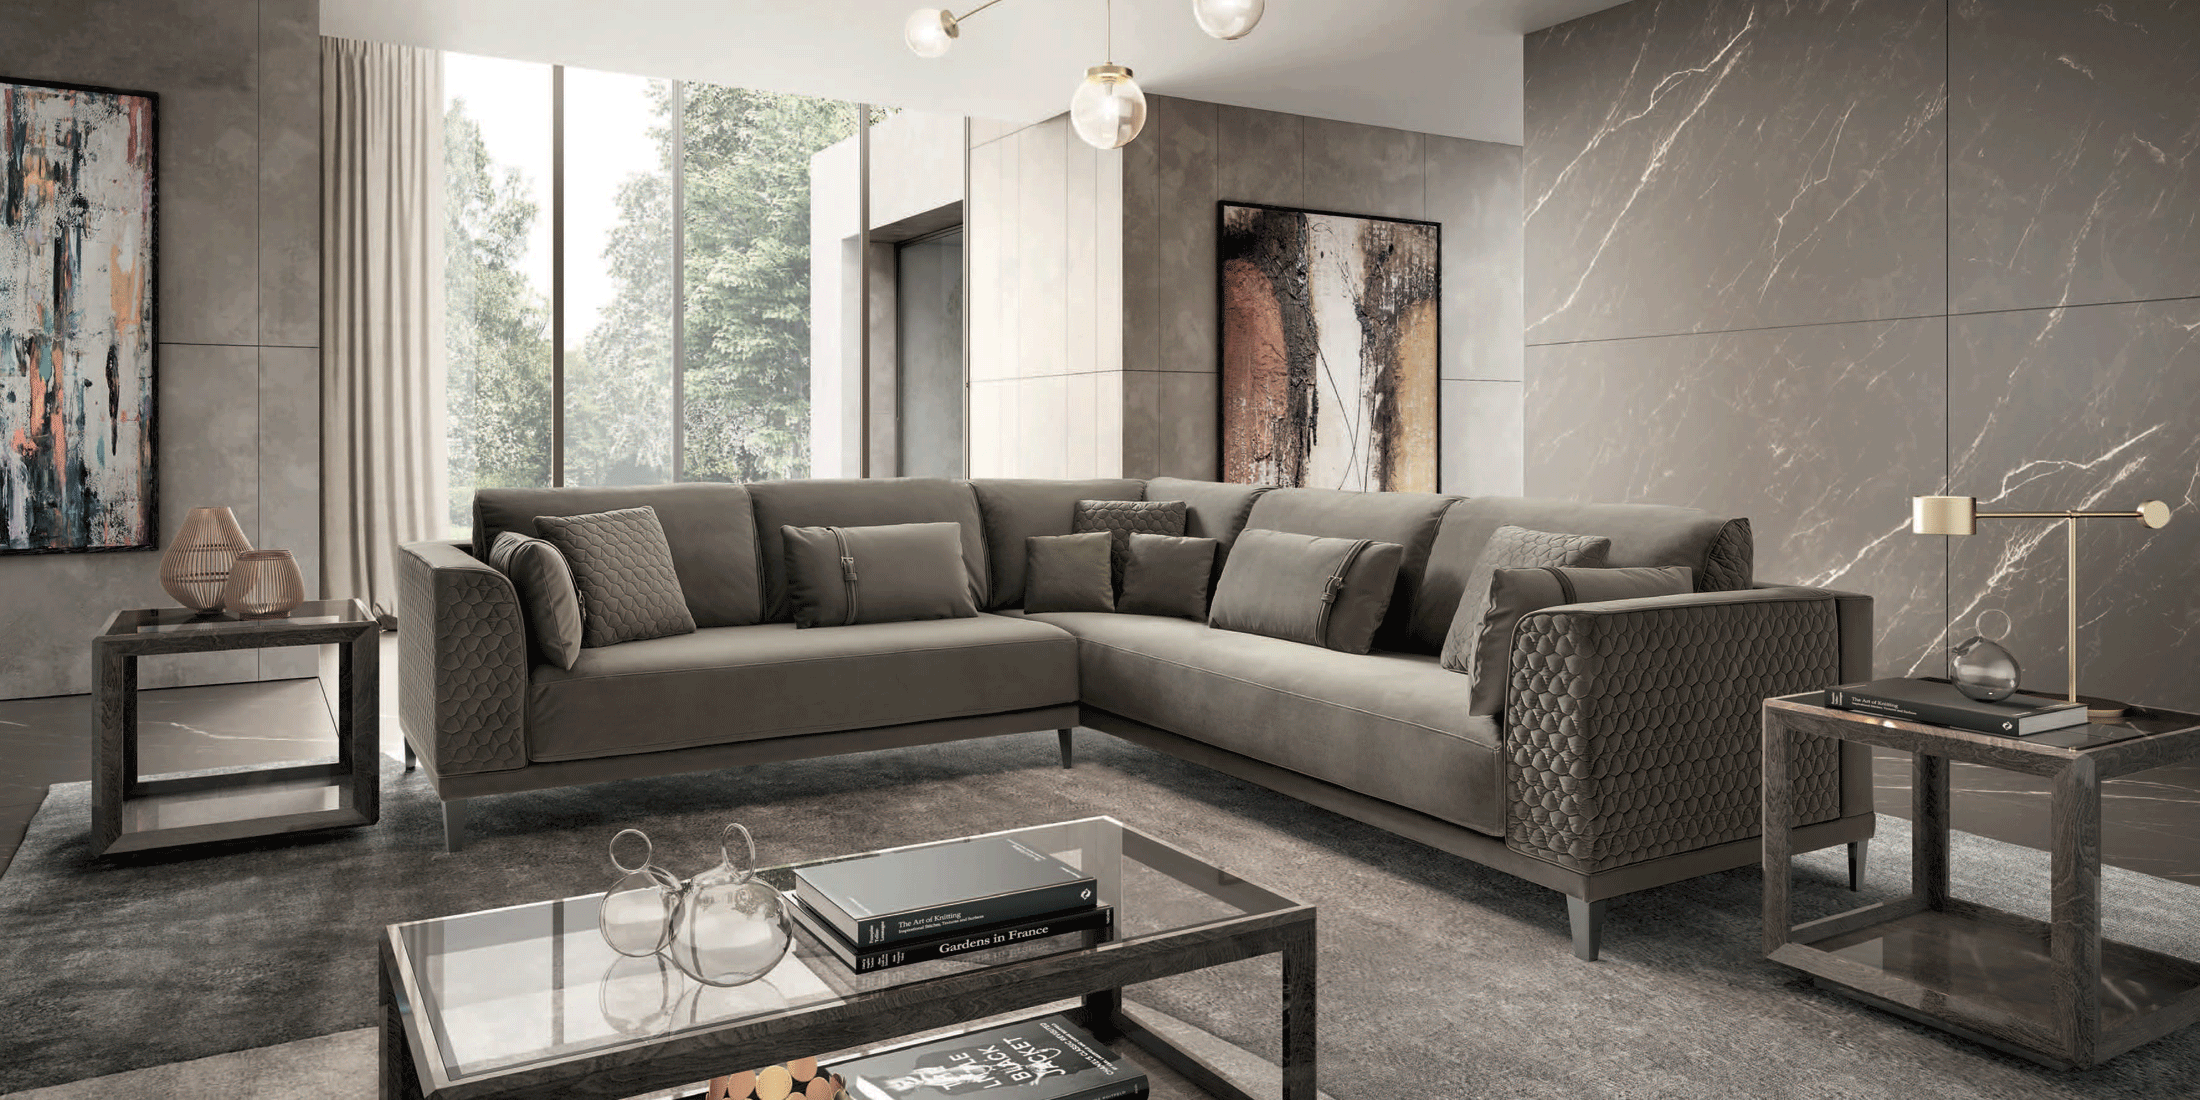 Living Room Furniture Reclining and Sliding Seats Sets Mood Sectional